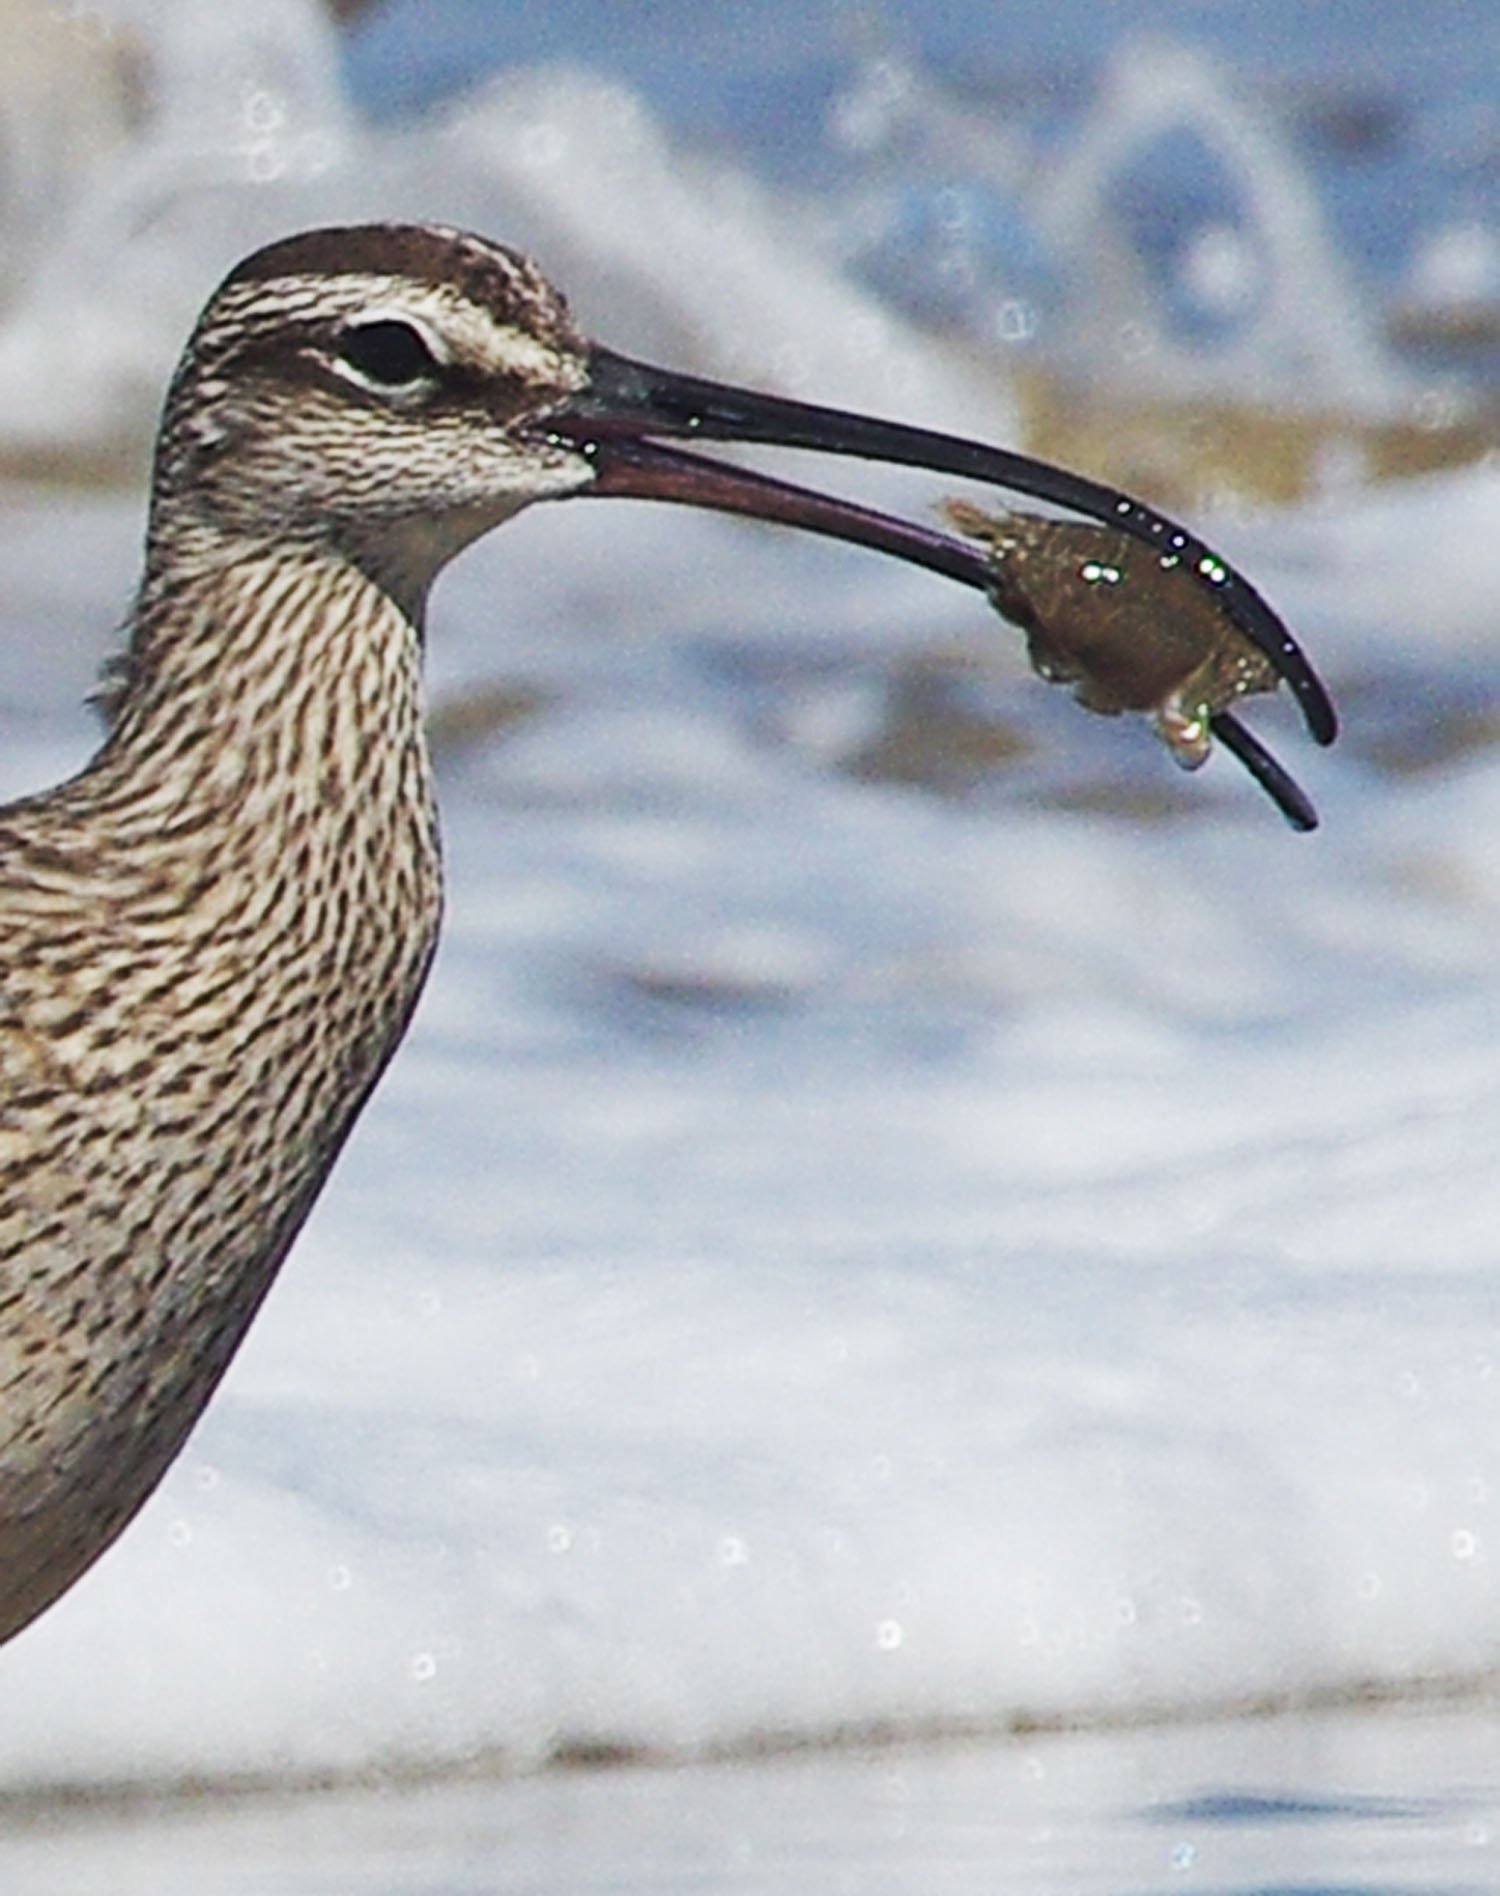 Long-billed bird holds a crab in its beak